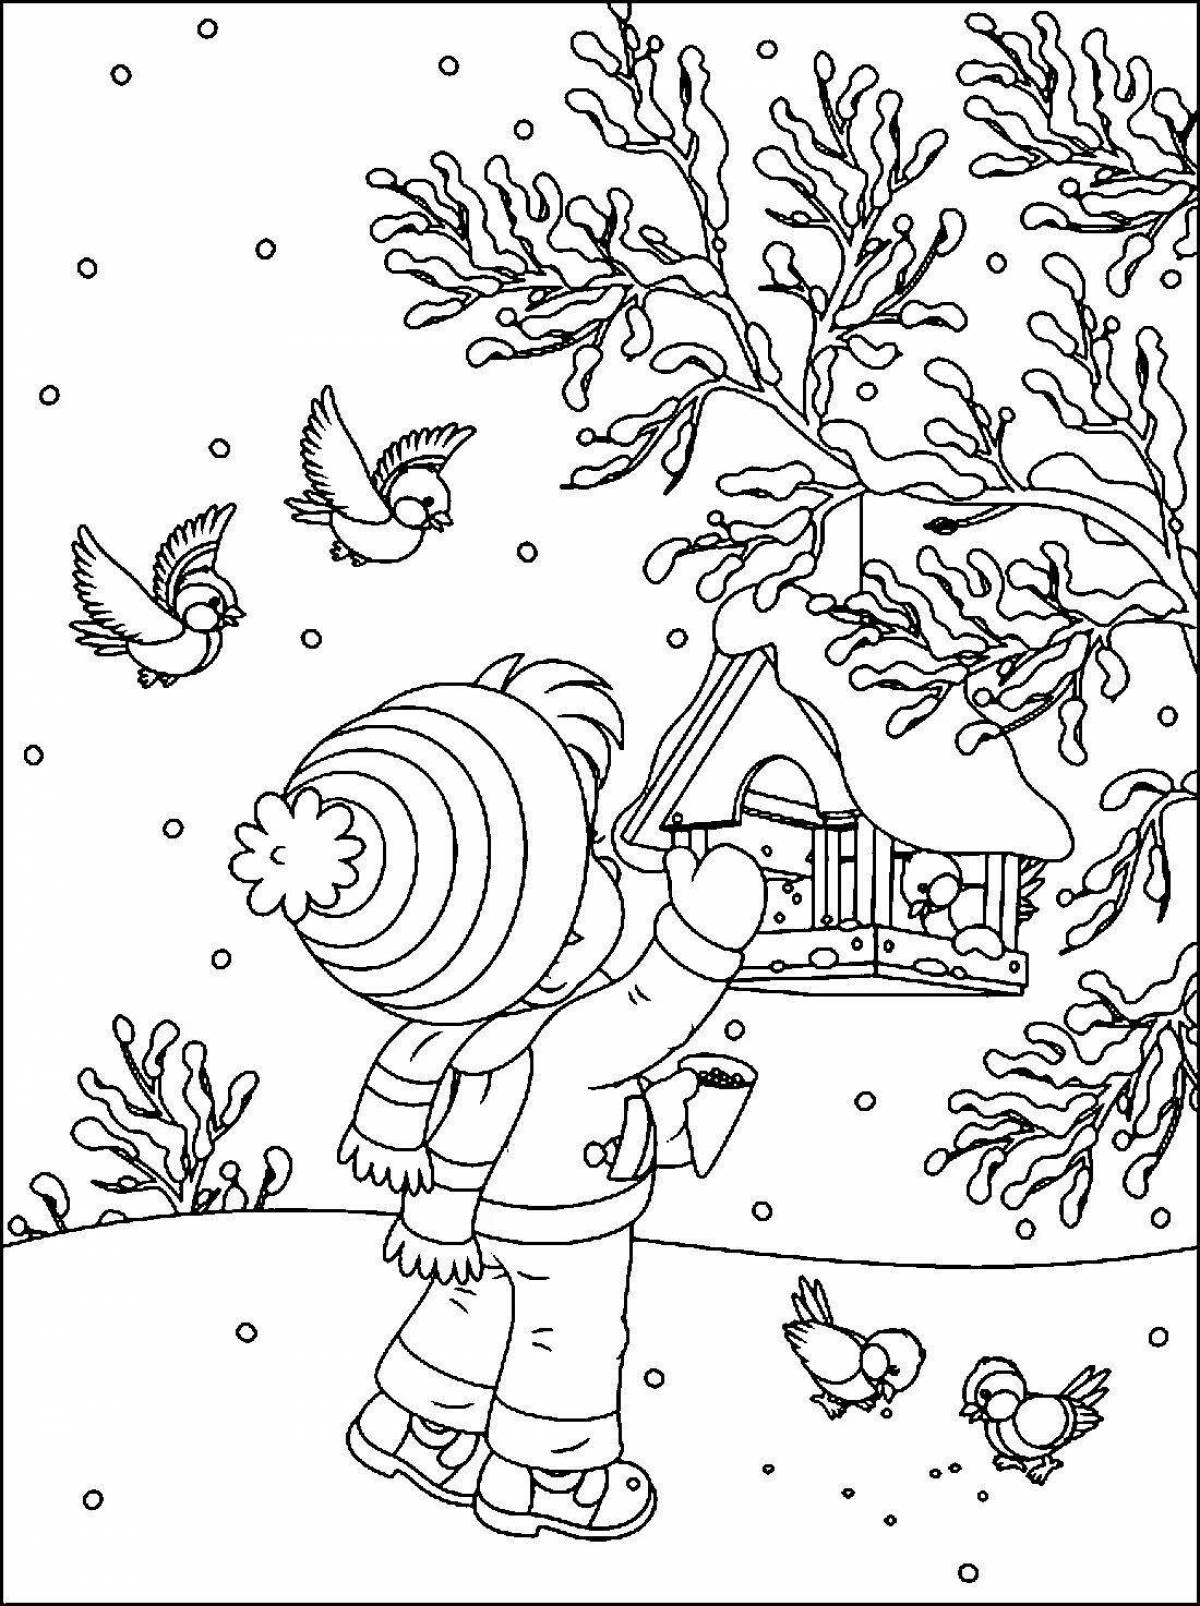 Coloring pages shiny winter birds